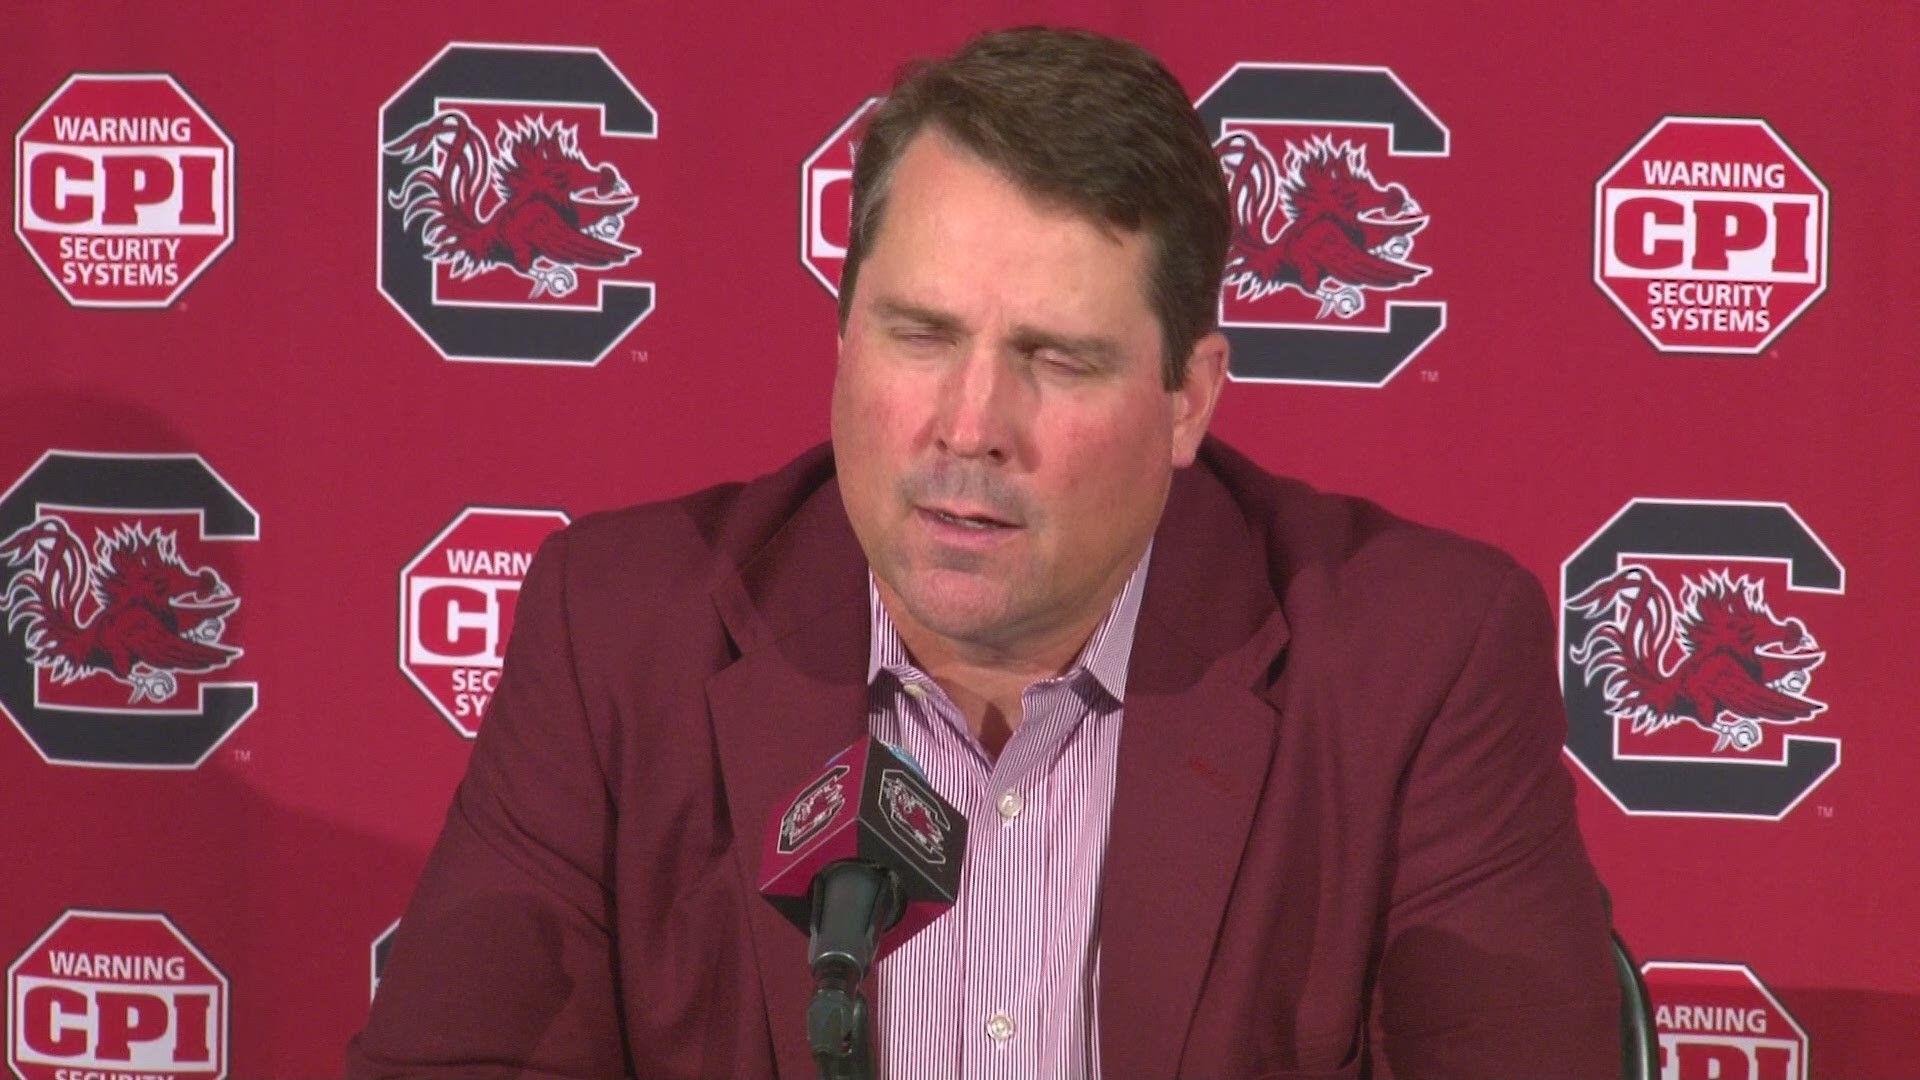 It's Game Week! The Gamecocks open the 2018 season this Saturday at home against Coastal Carolina and Will Muschamp talks about his team and the depth chart going into the first game of the year.